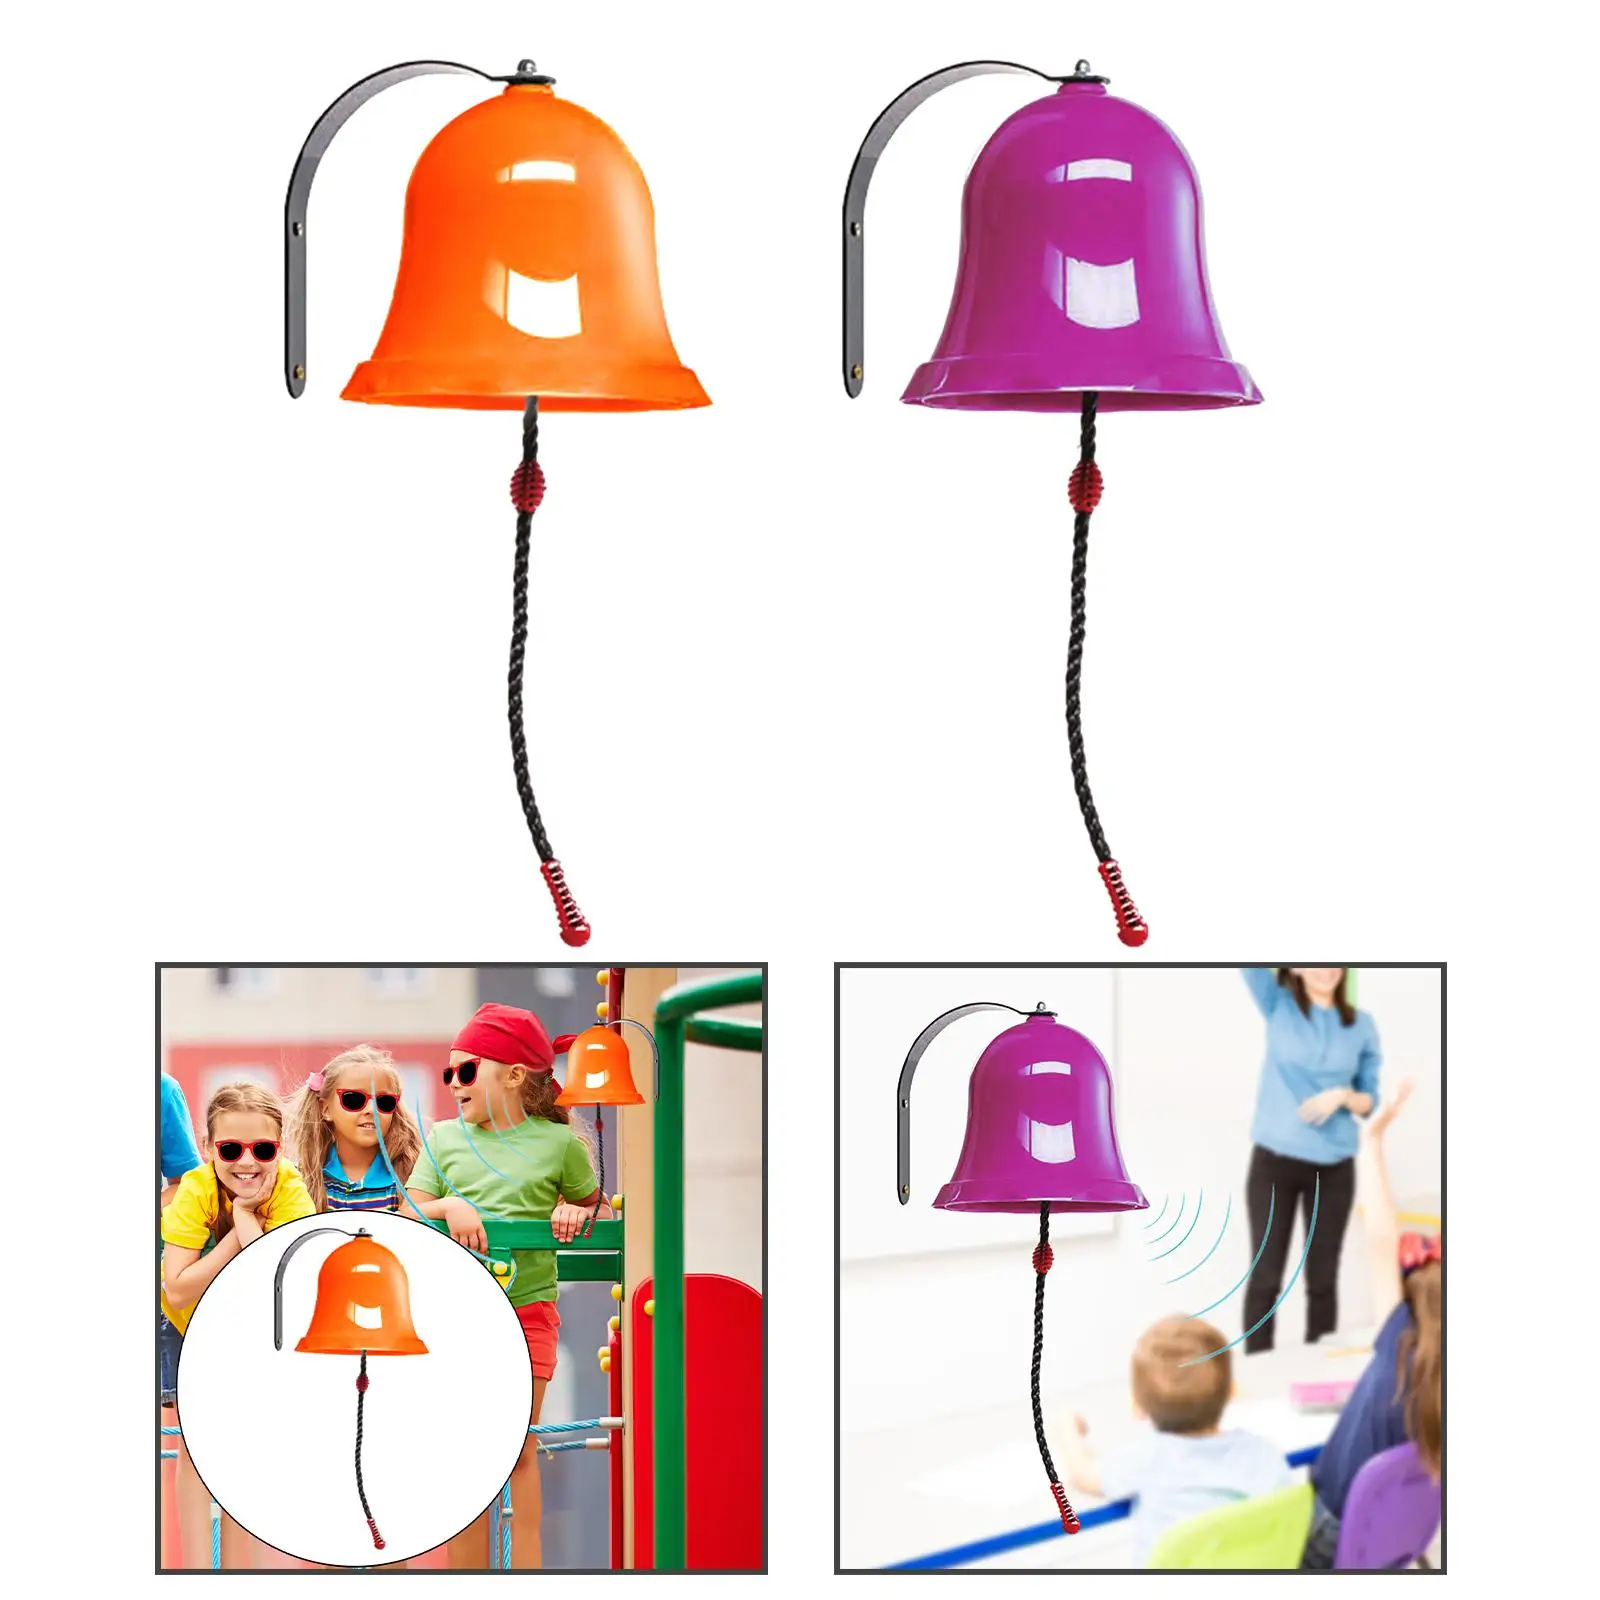 

Toy Bells Wall Mounted Dinner Bell Ship Bell Metal for Playground Home